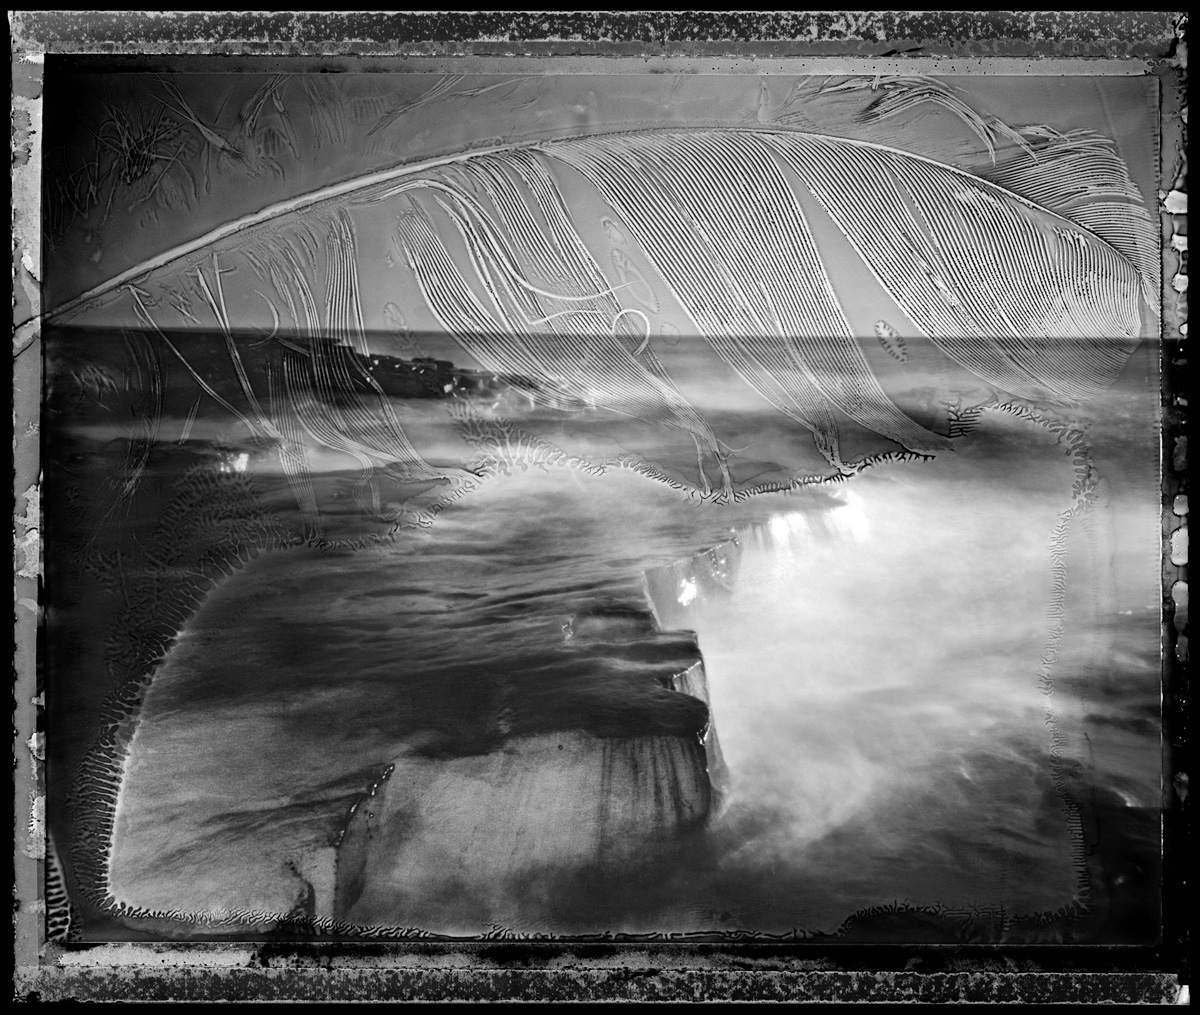 Artist Point and Feather - pinhole camera photograph